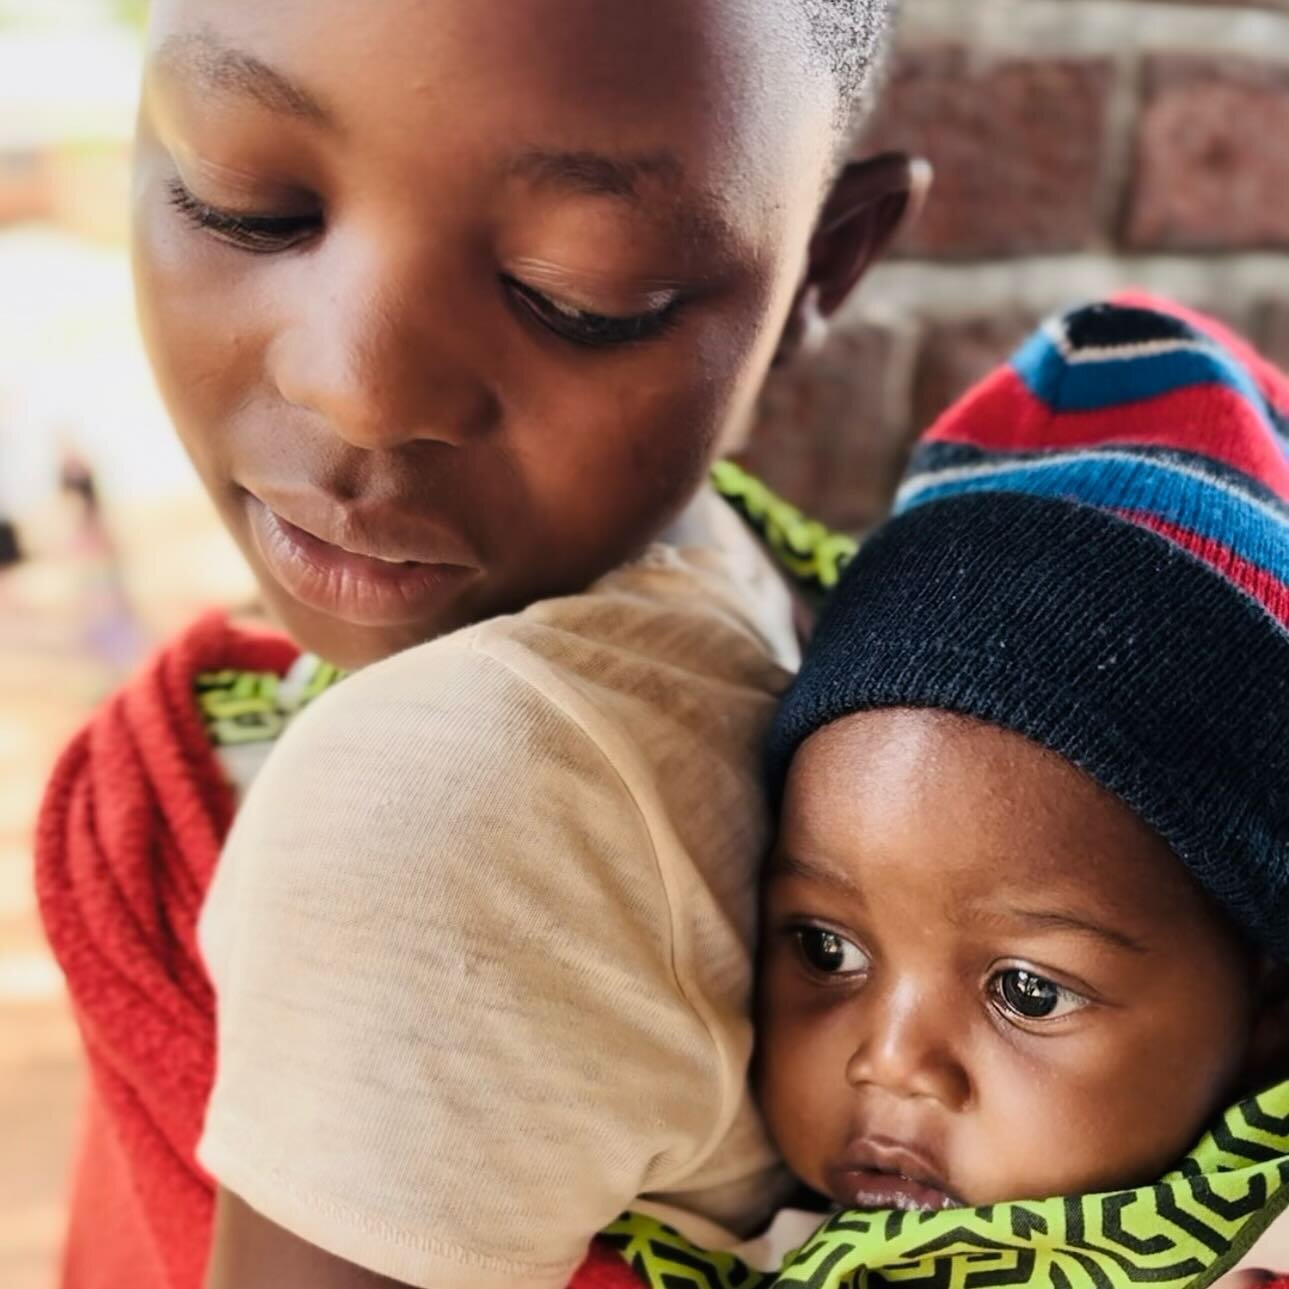 Join together all of our hearts as one&hellip;Let us unite, to build up Malawi&hellip;With our love, passion, and loyalty&hellip;Bringing our best to her. One purpose and one goal. 

Our Raising Malawi team snapped this special moment in time on our 